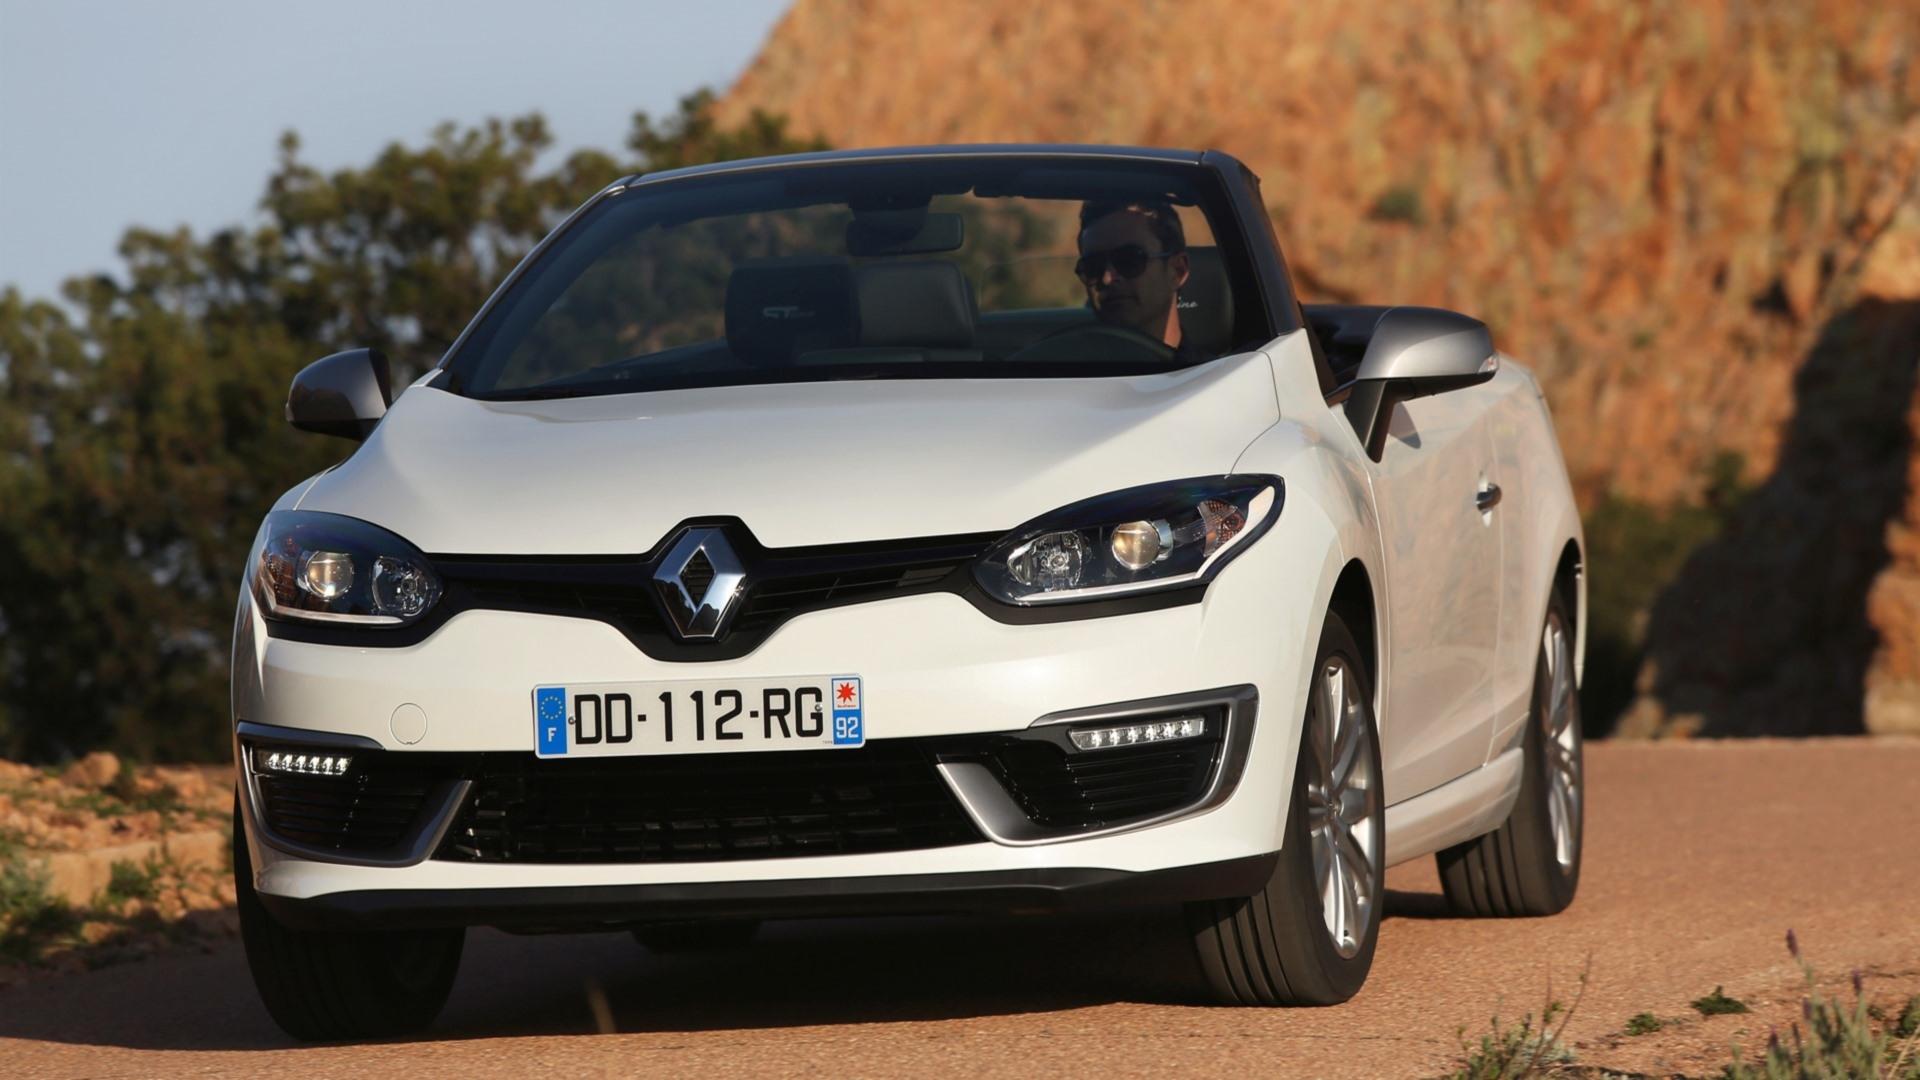 2015 Renault Megane Coupe-cabriolet wallpapers HD quality